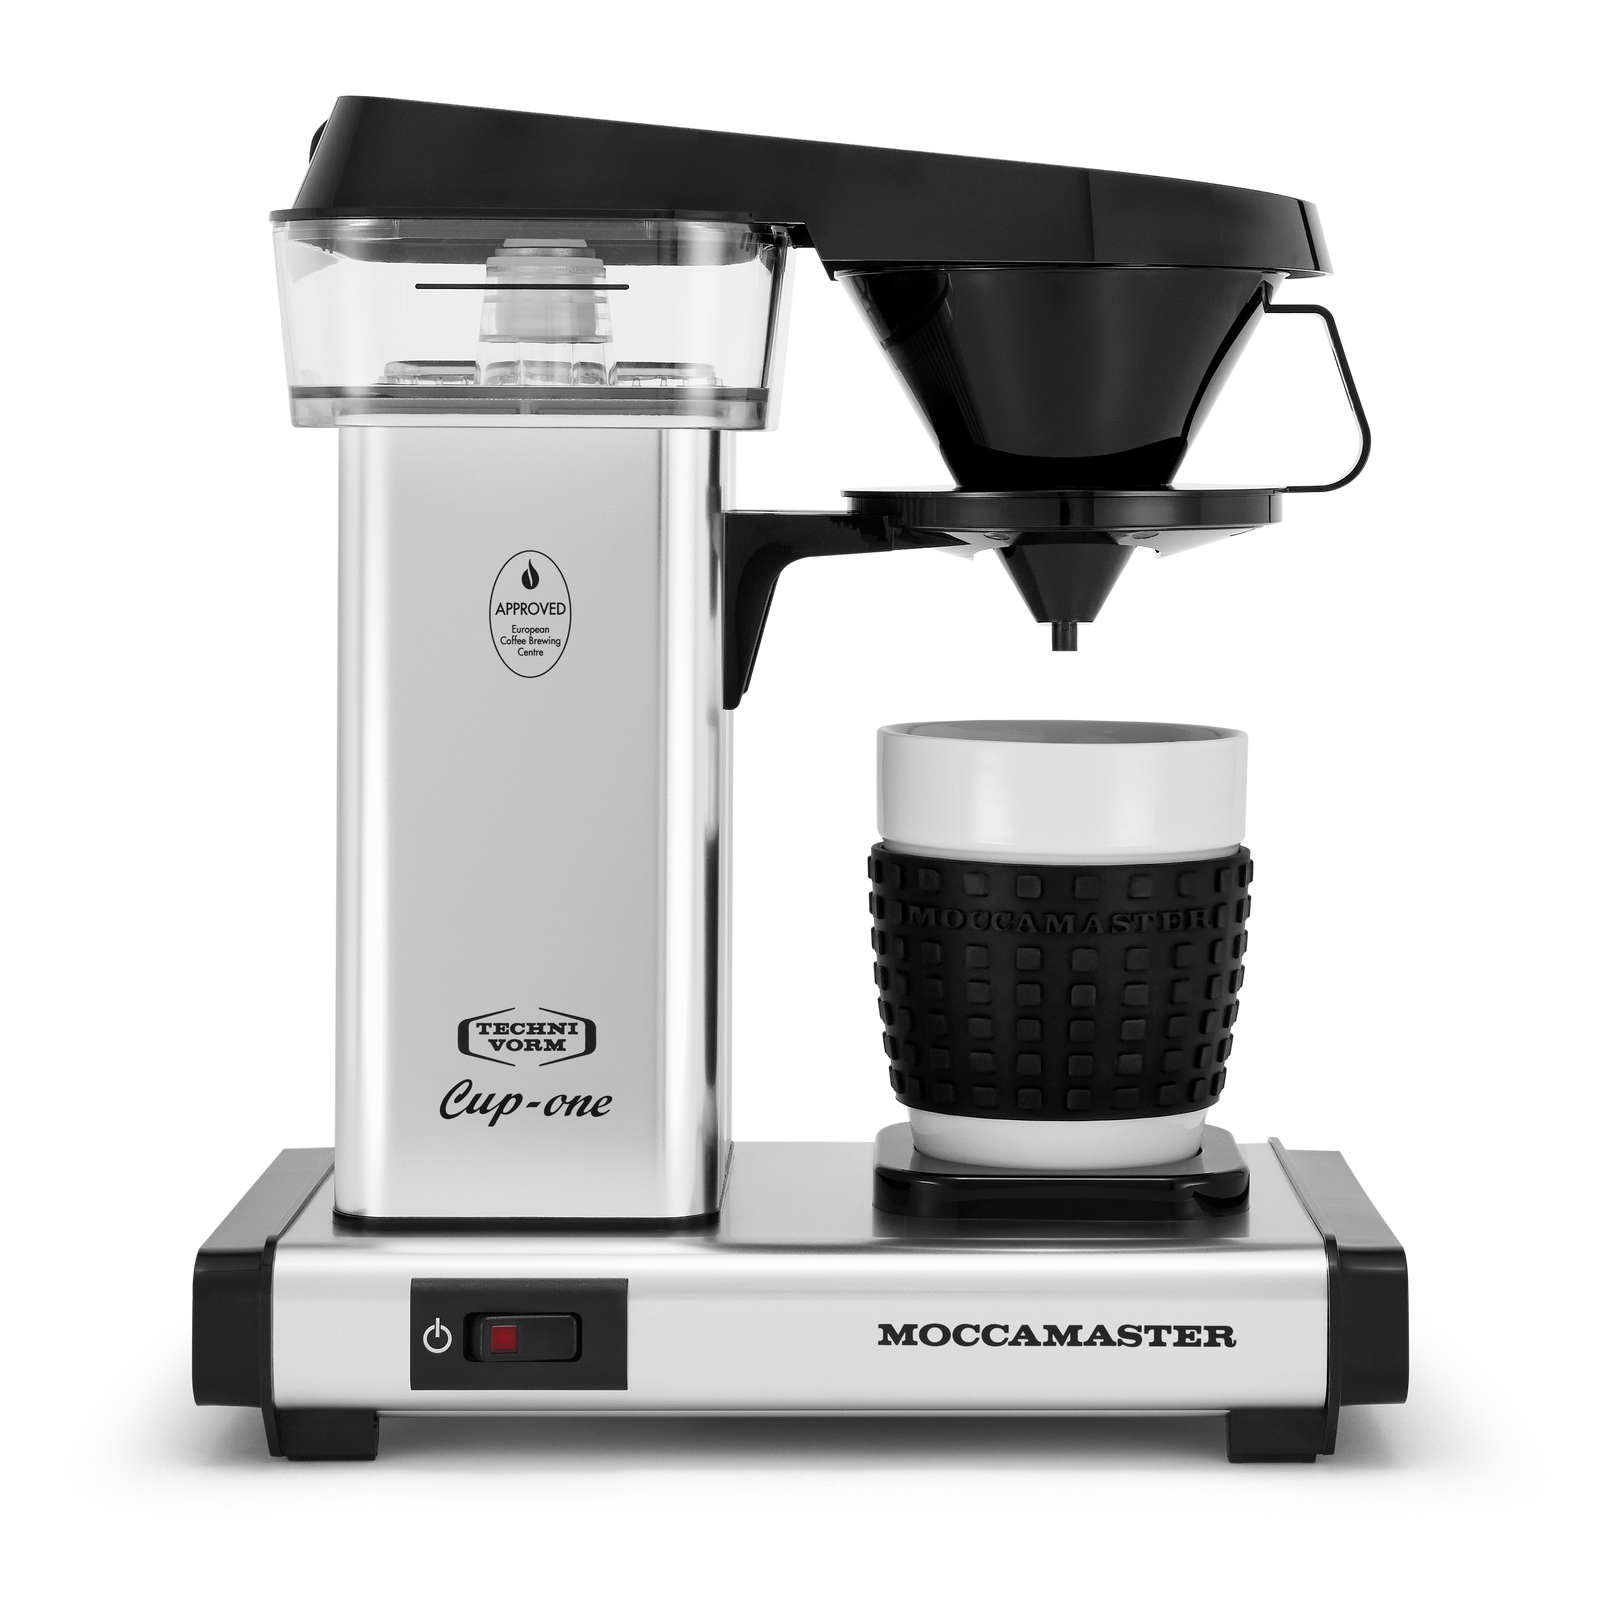 Moccamaster USA: Premium Pour-Over Coffee Brewers